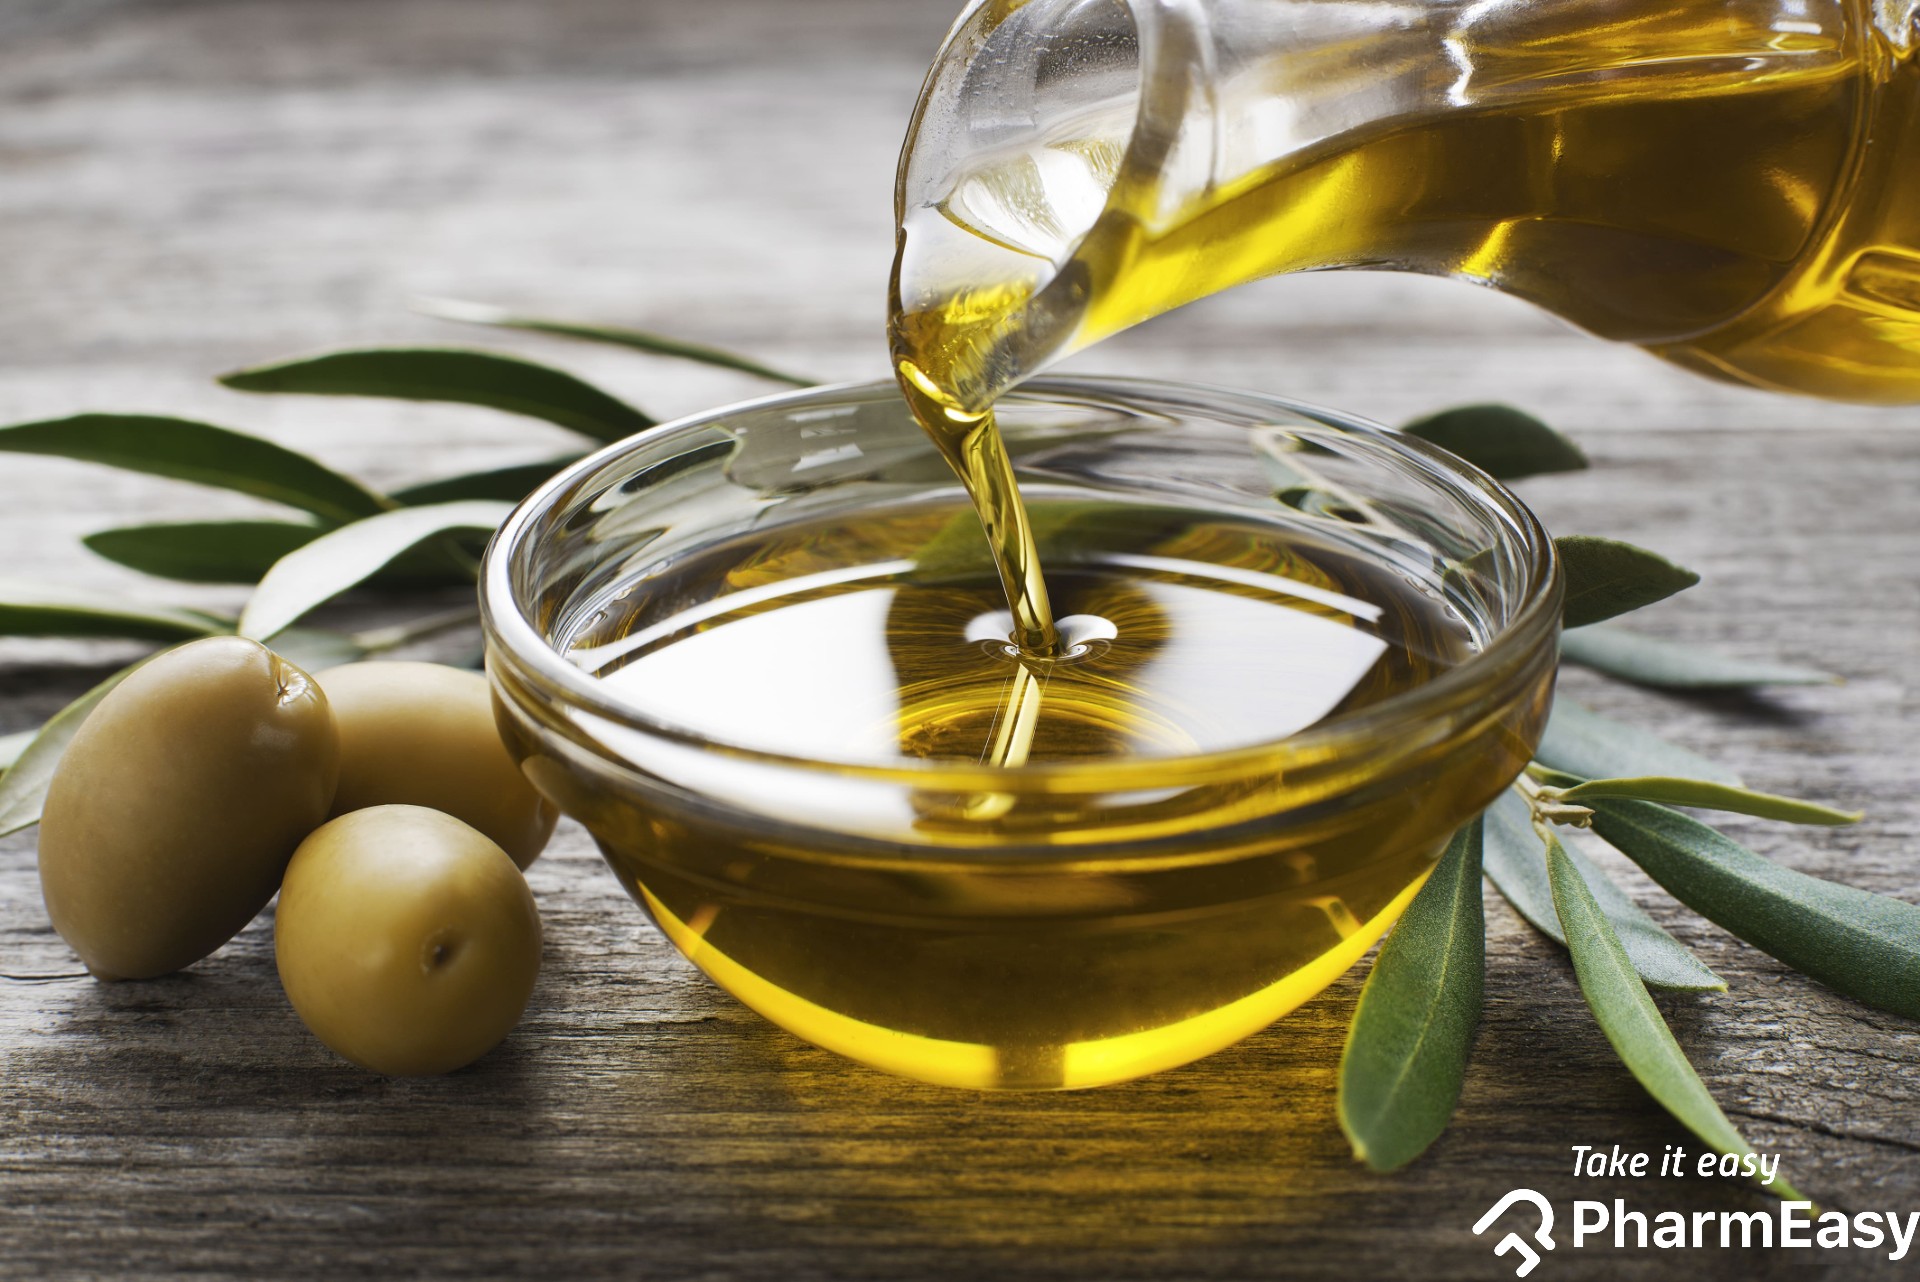 Benefits of Olive Oil for Hair & Skin: How to Use Olive Oil for